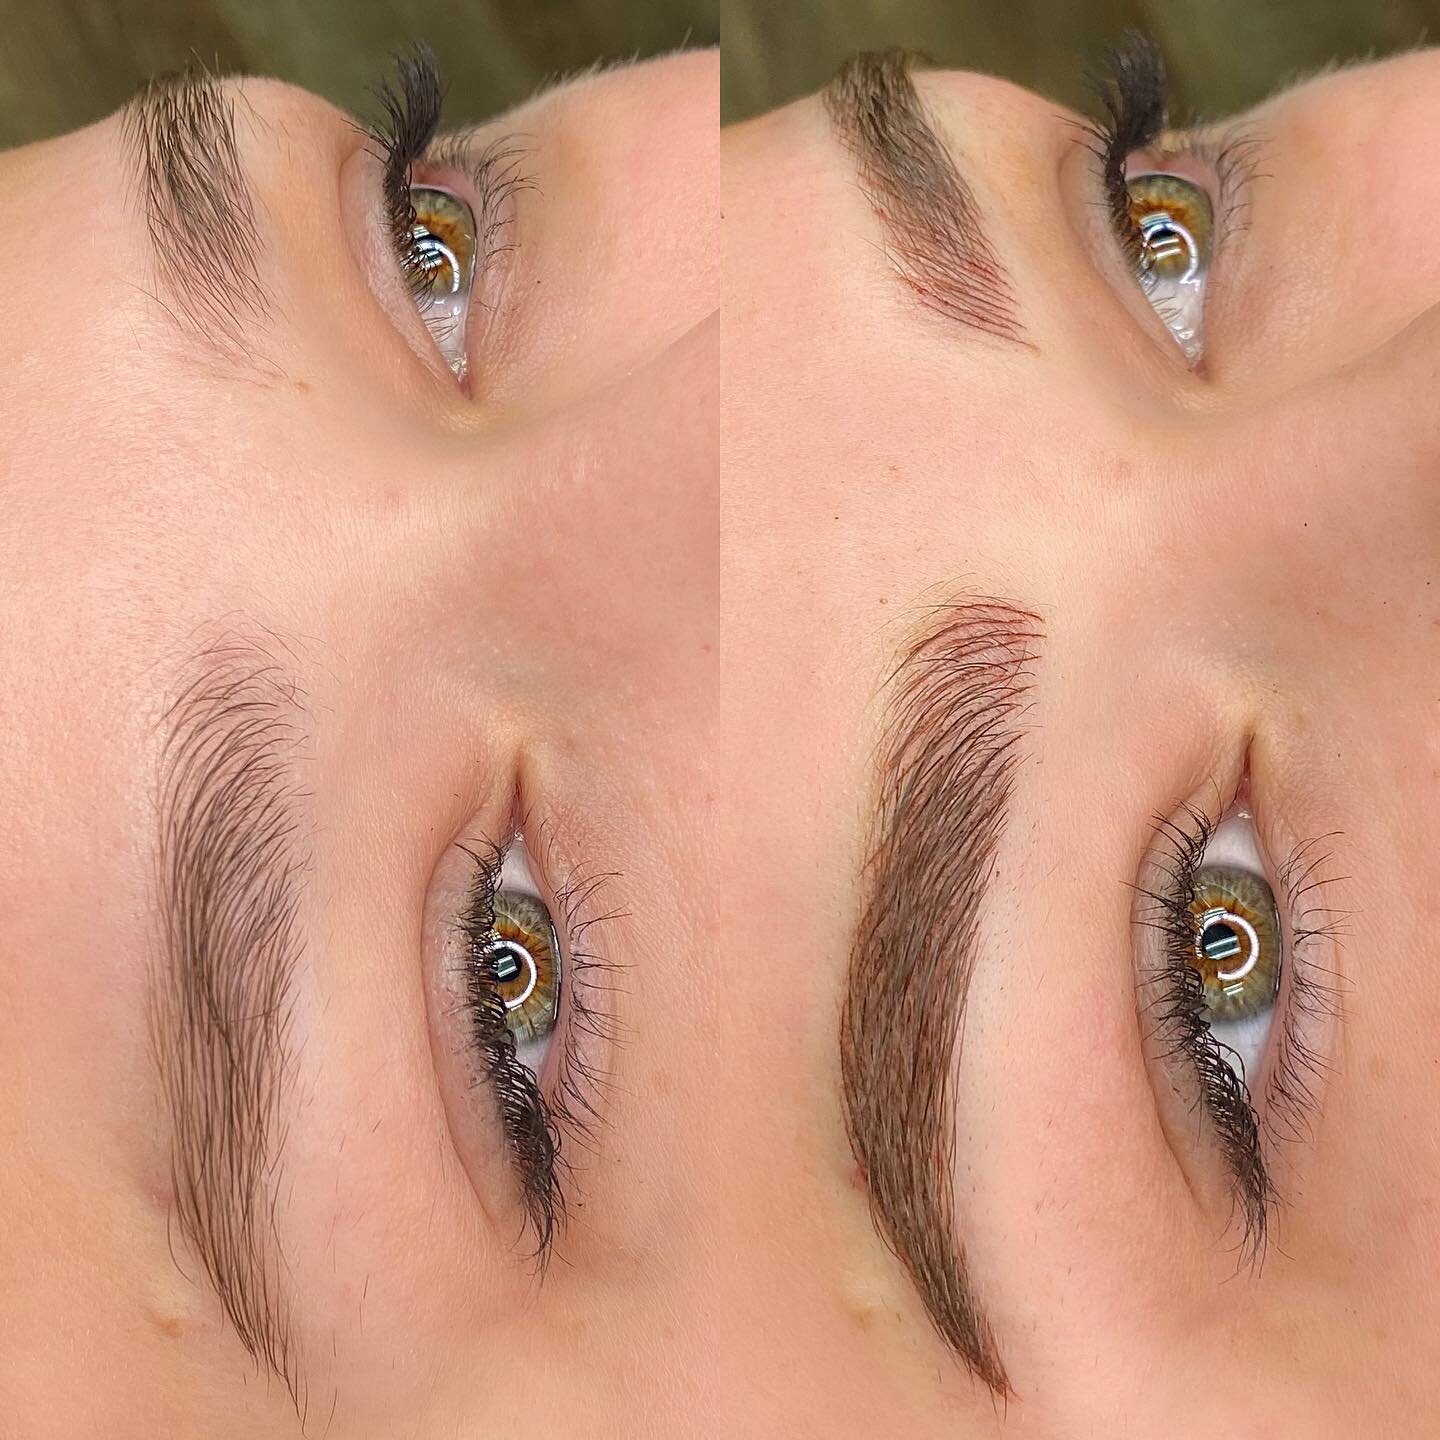 From flat sad brows to archy happy brows 🙈
&bull;
&bull;
&bull;
&bull;
&bull;
#sandiegobrows #sandiegomicroblading #microblading #sandiegocombobrows #sandiegopmu #microbladingsandiego #lamesamicroblading #northparkmicroblading #hillcrestmicroblading